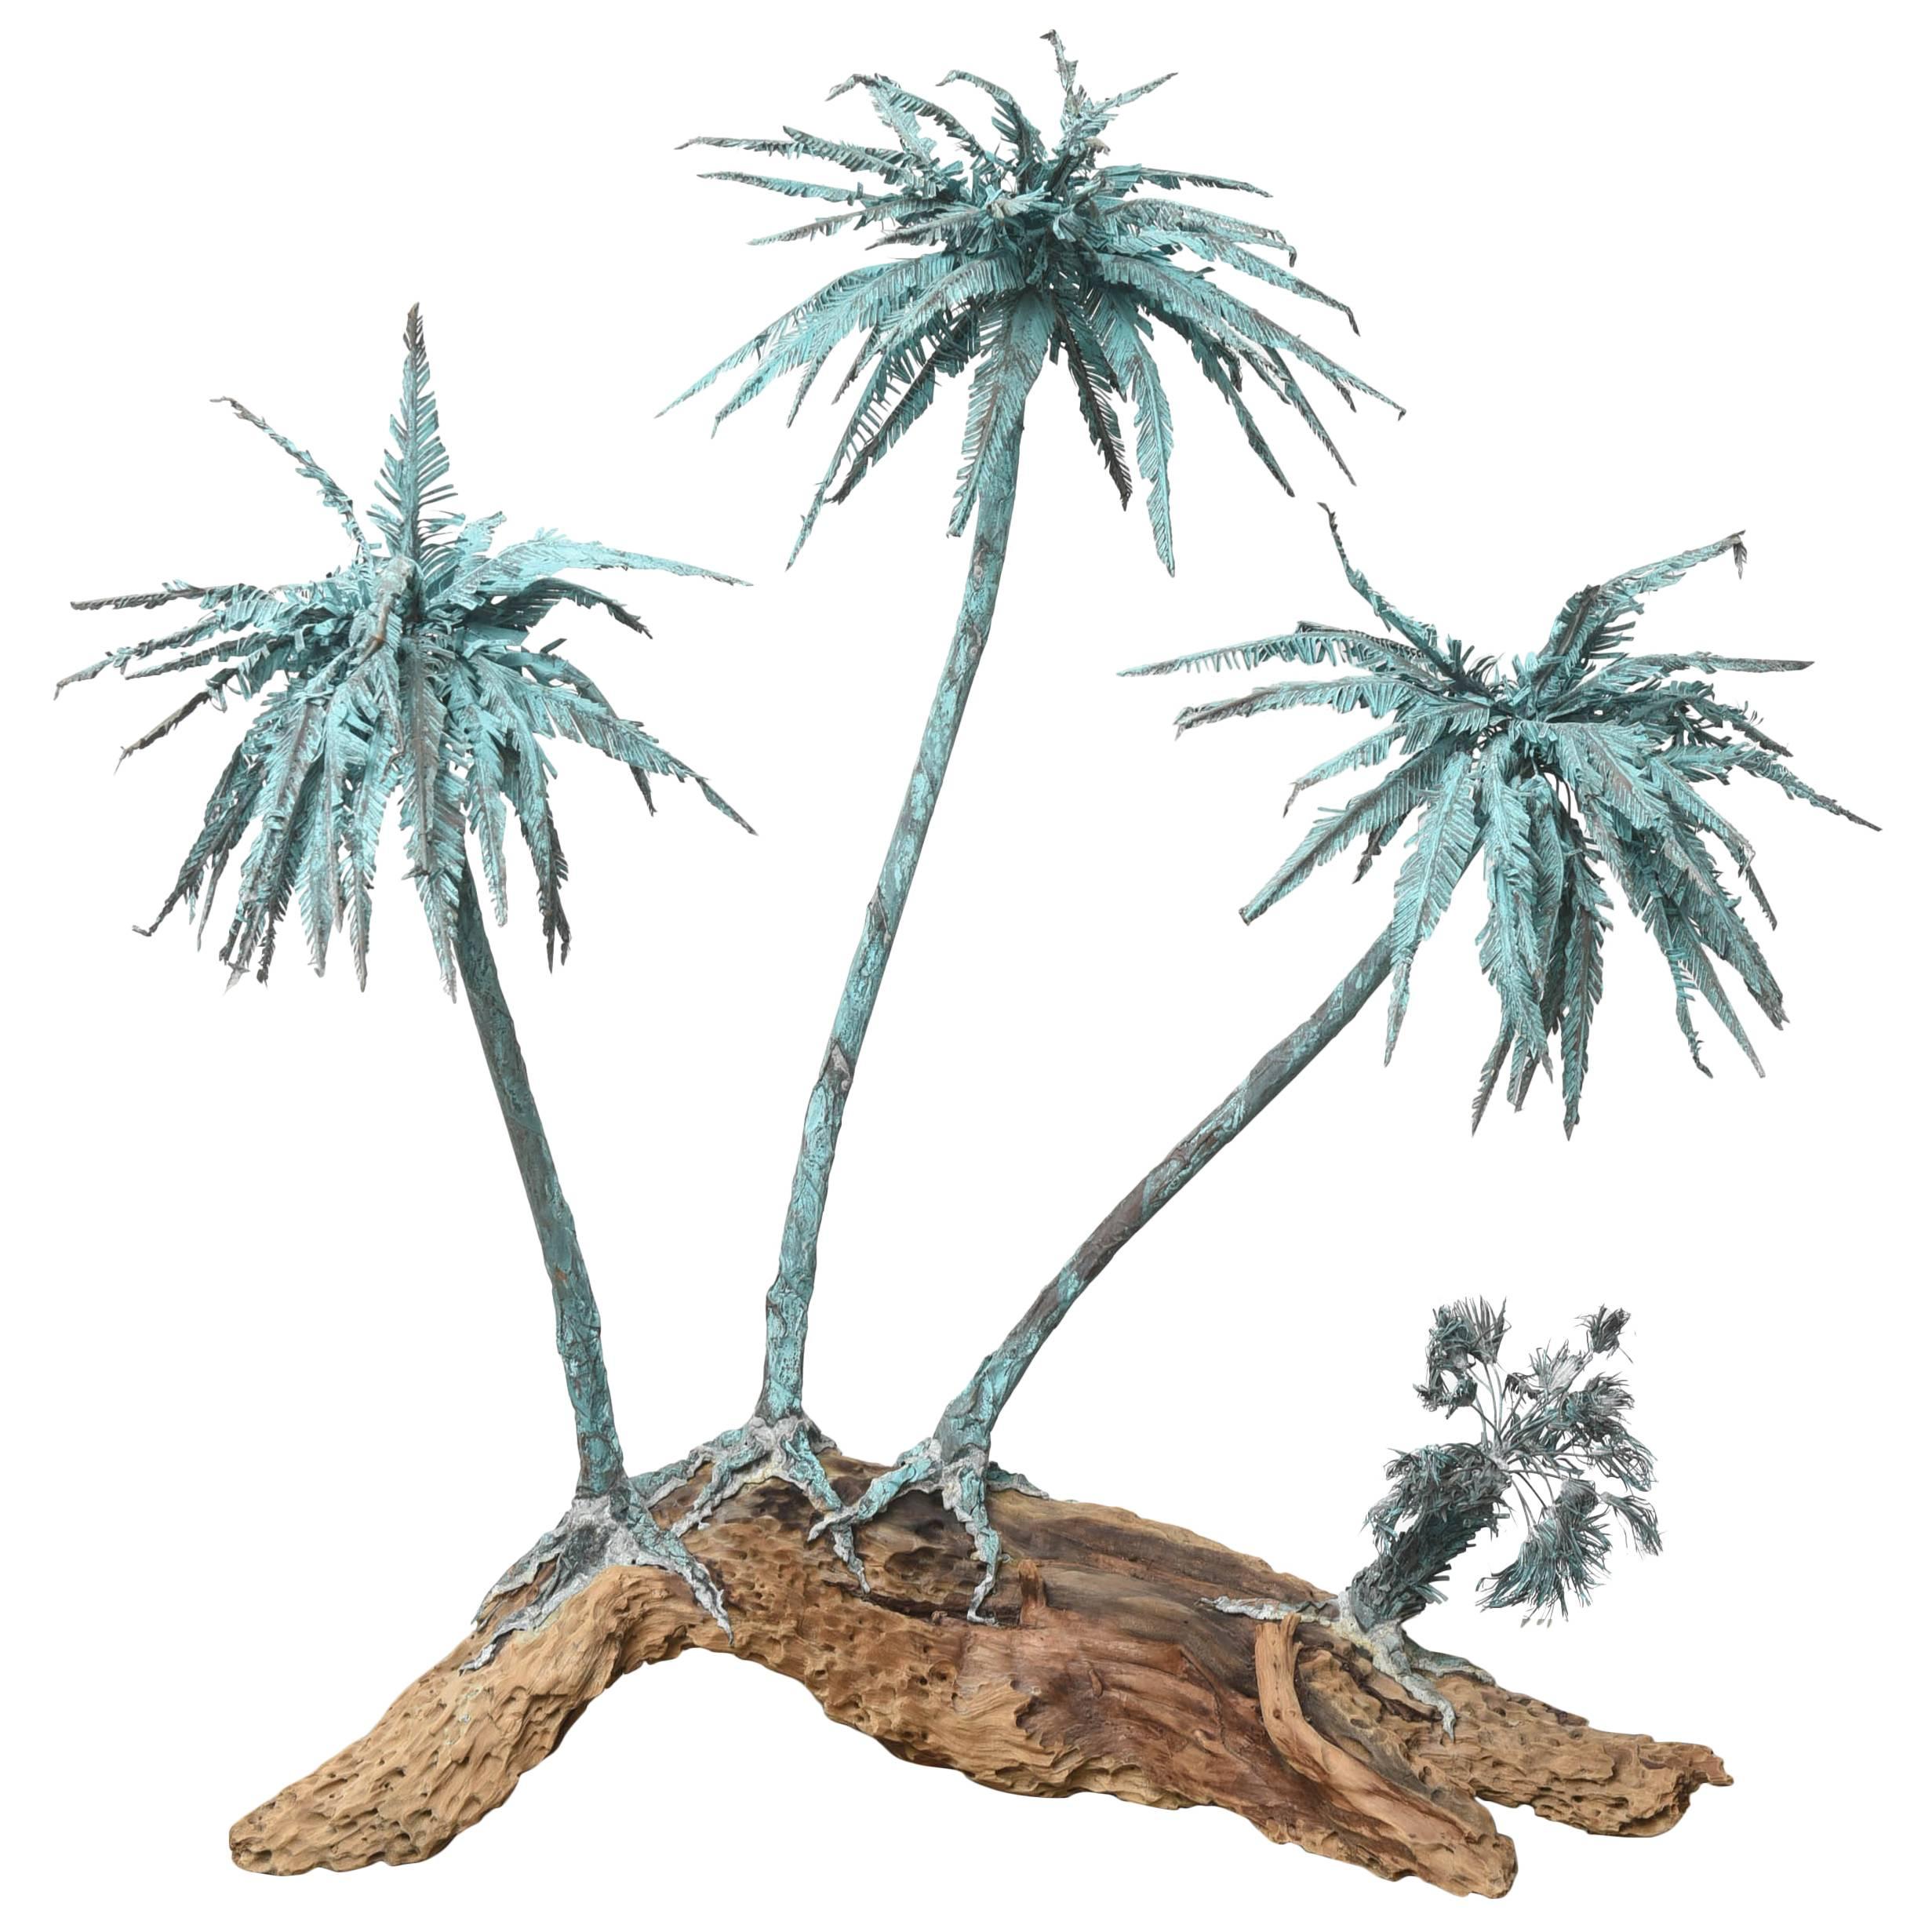 Giant "Palm Trees on Driftwood" Sculpture For Sale